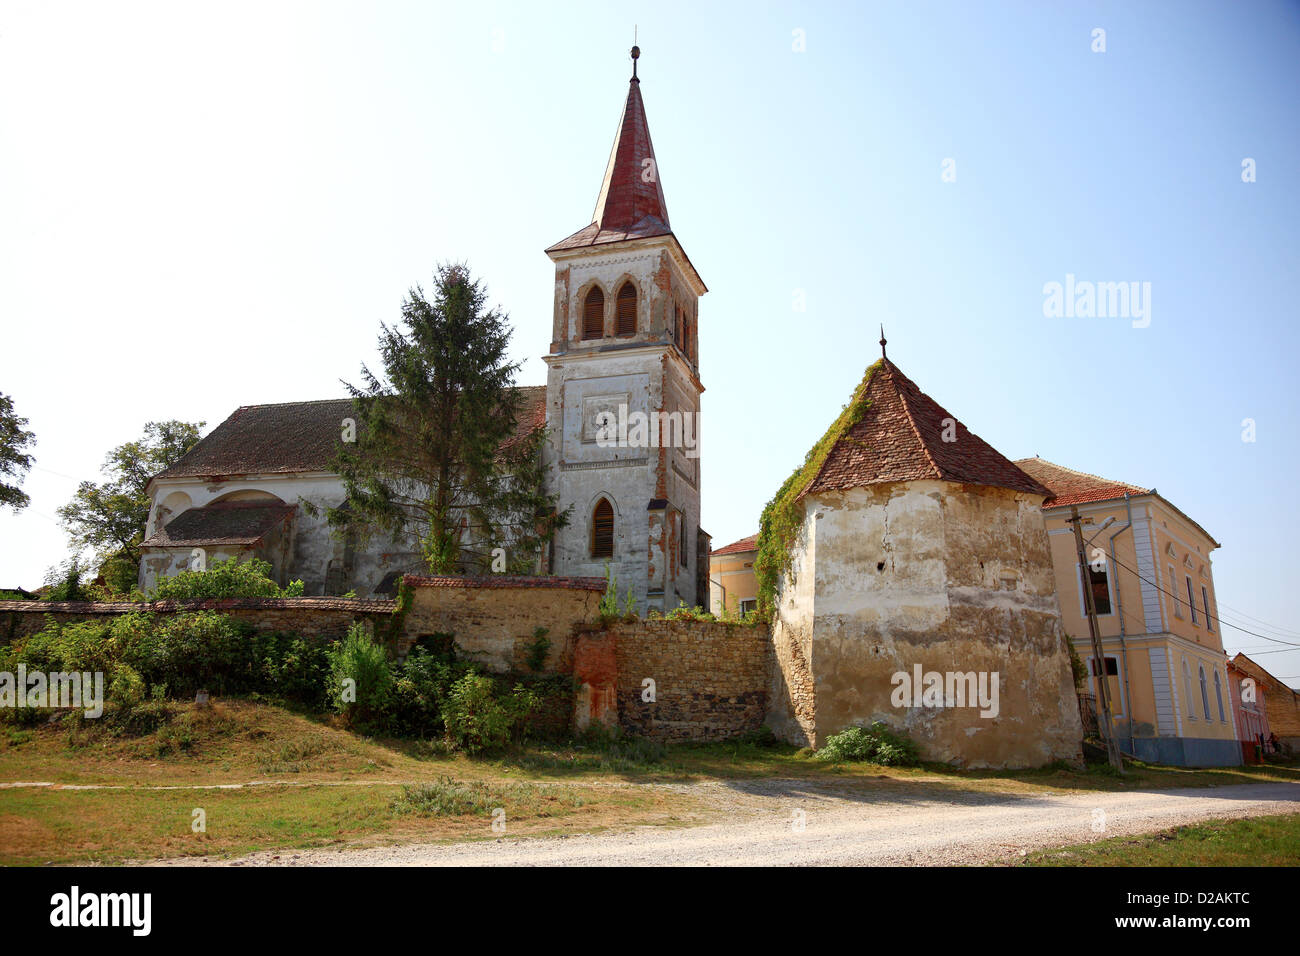 Fortified church of Beia, a commune in Brasov County, Romania. Stock Photo